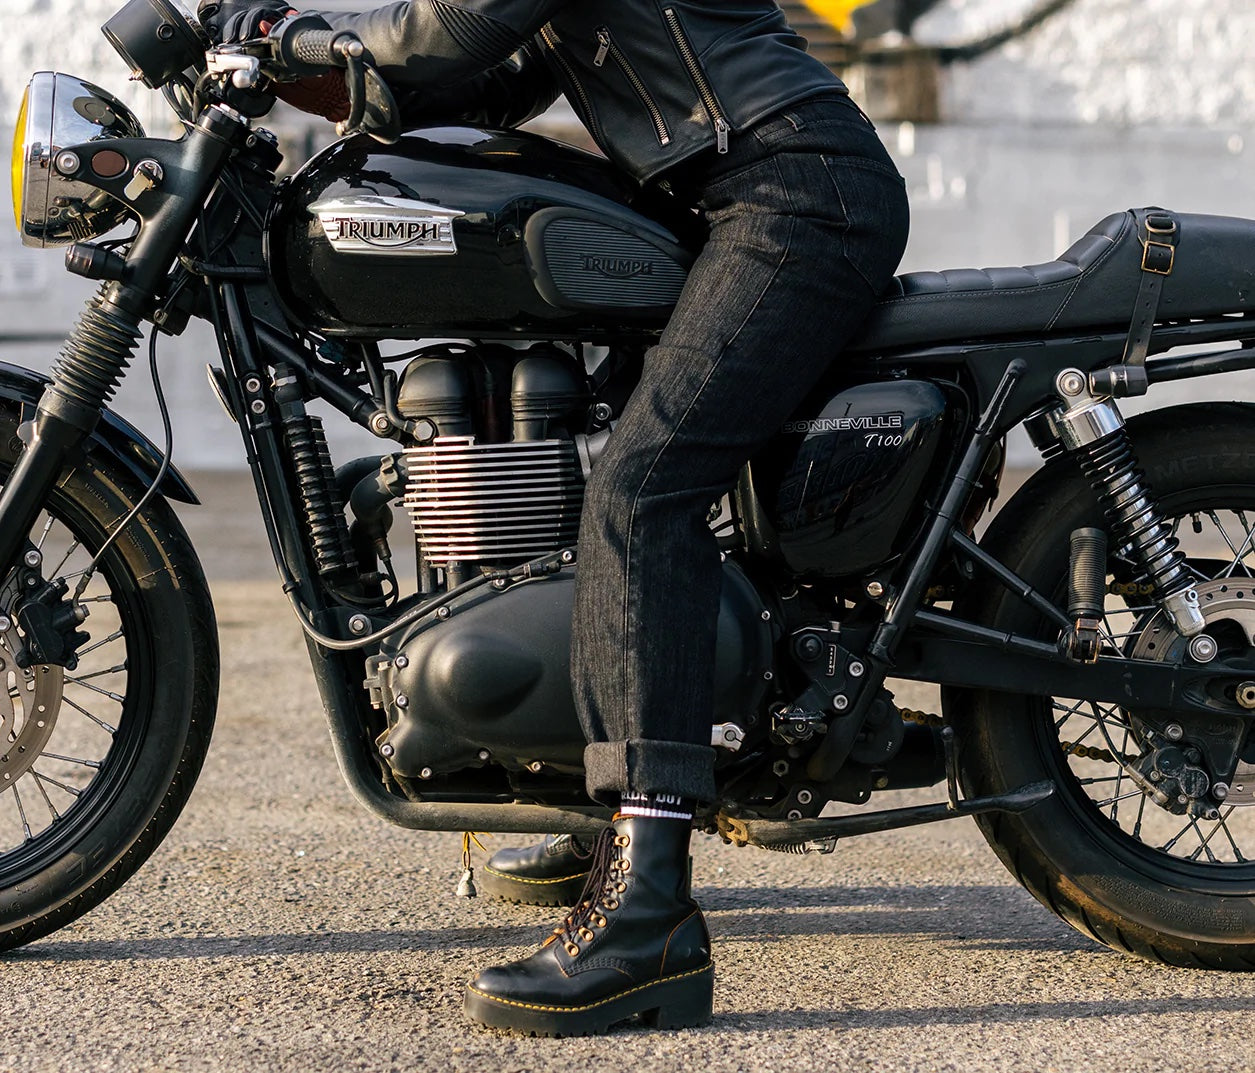 ATWYLD Backroads Moto Jeans - Midnight Blue